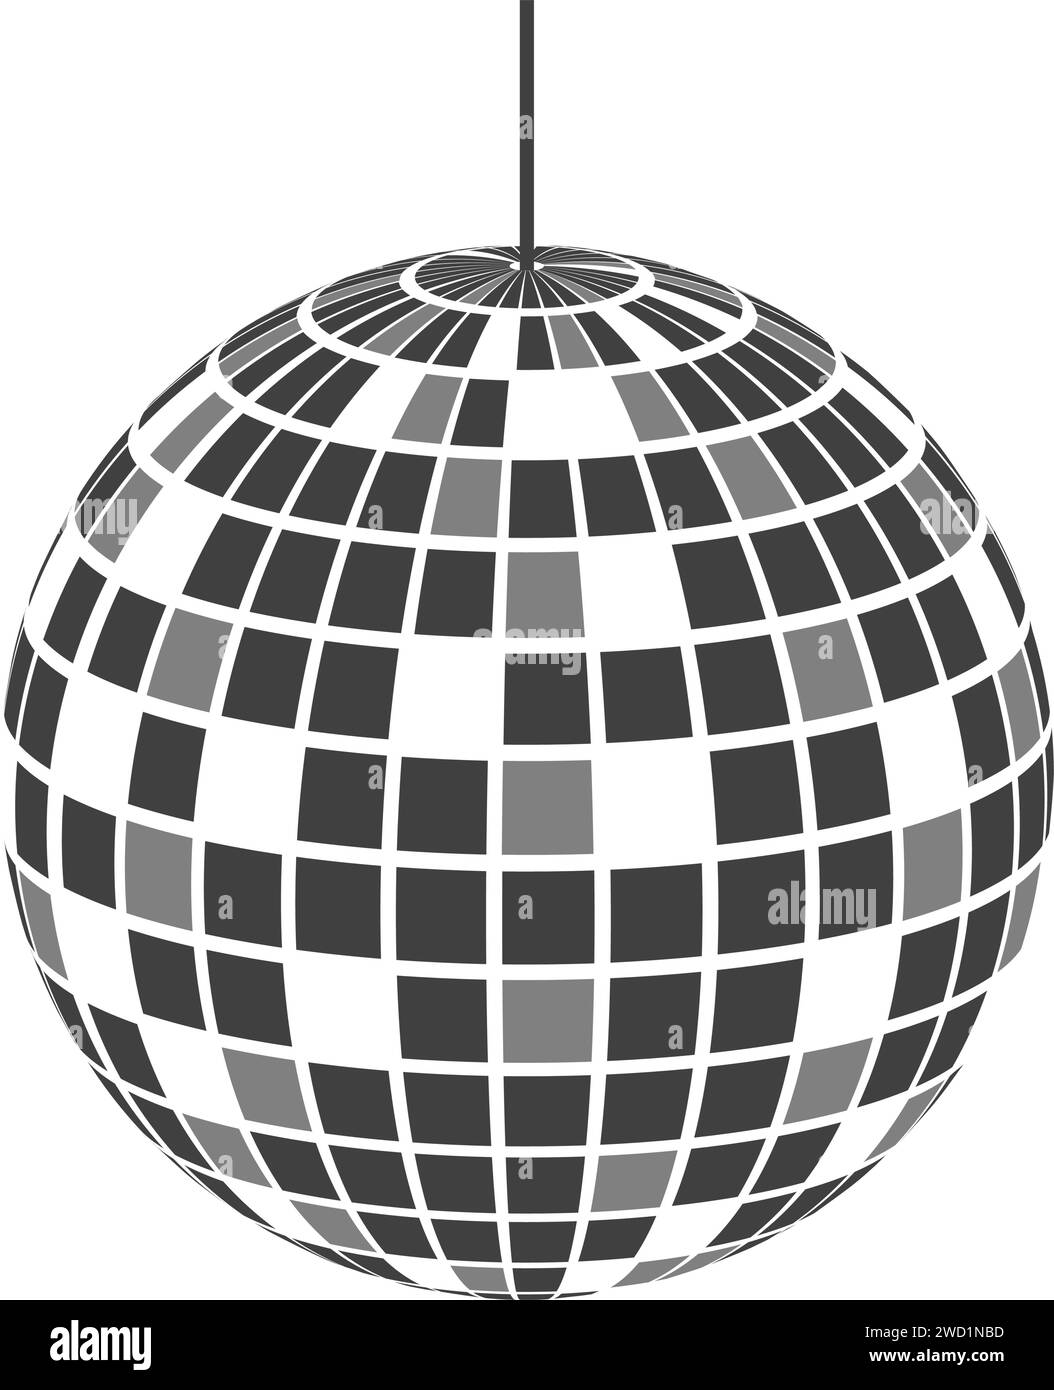 Disco club mirrorball icon. Shining nightclub sphere. Dance music party discoball. Glitterball in retro discotheque style. Nightlife symbol isolated Stock Vector